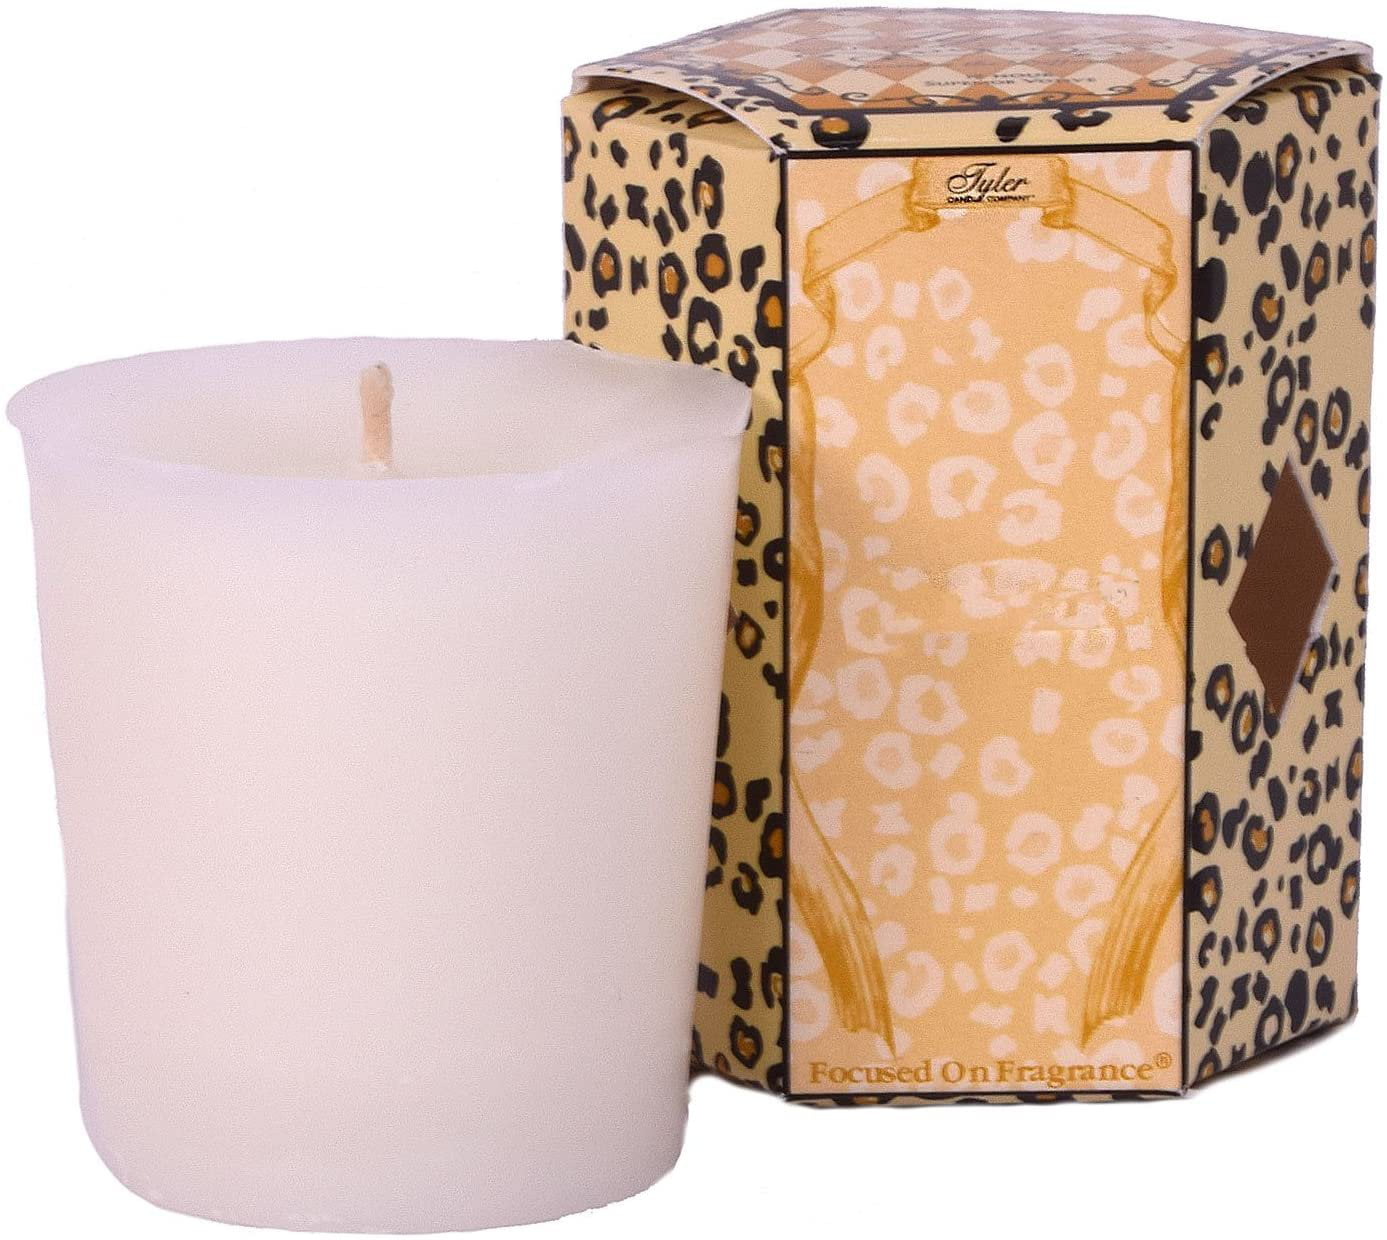 Tyler Votive Candle YOU PICK THE FRAGRANCE ~#1 selling candle in the USA 